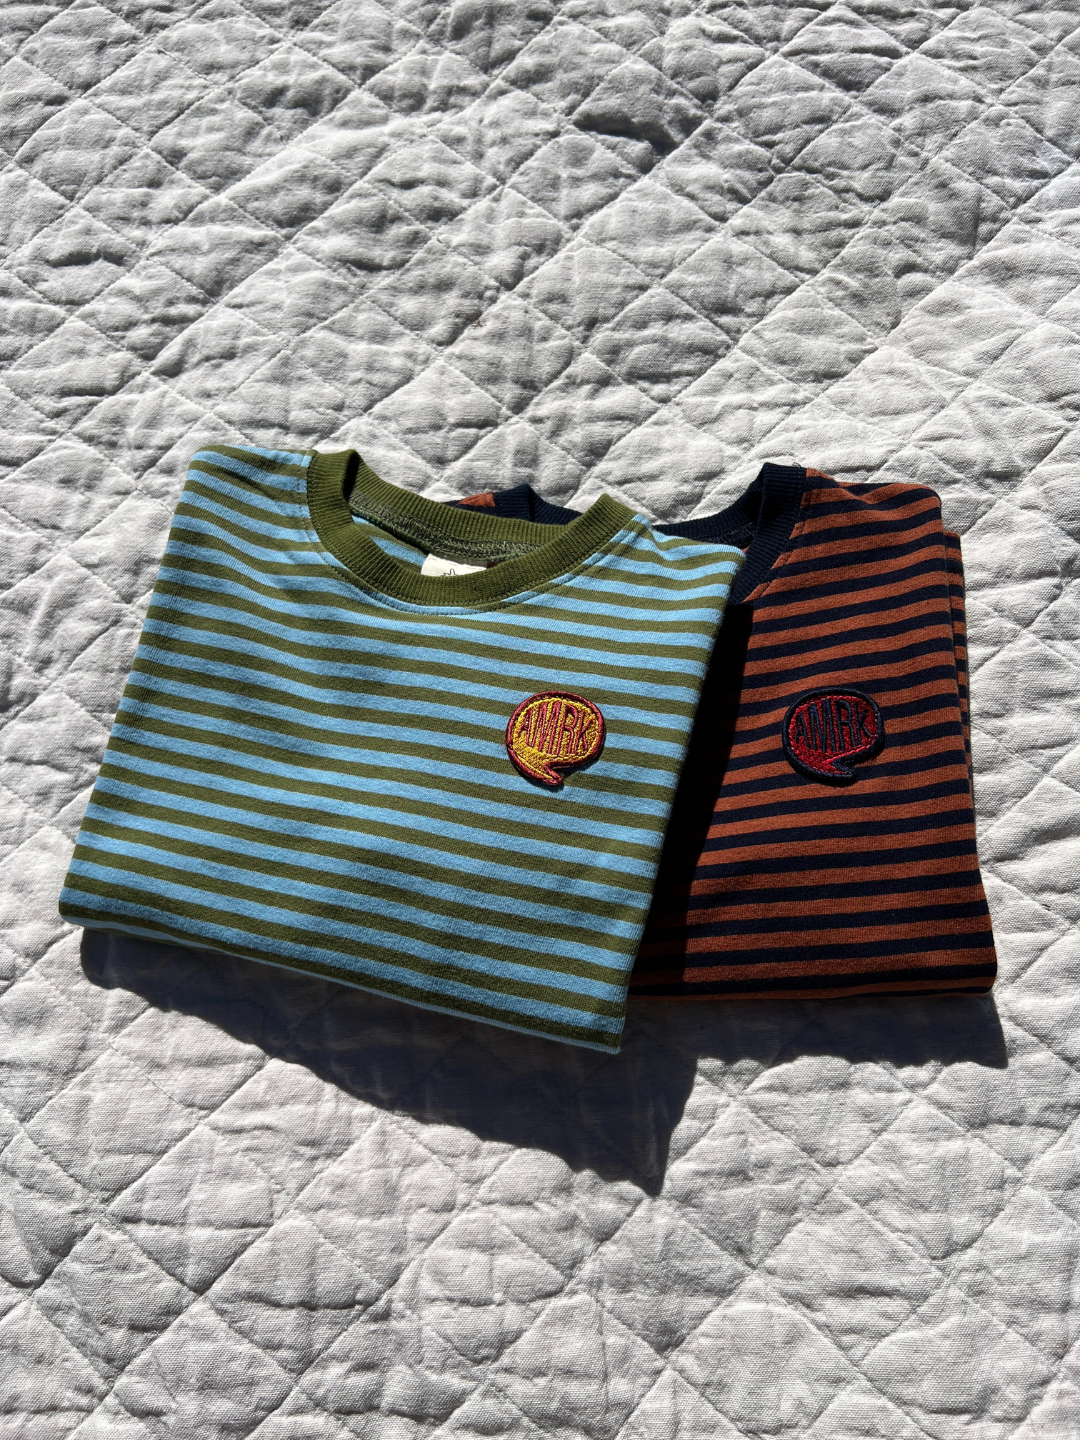 Comma Striped Longsleeve in Sky/Olive and Rust/Navy laid on blankets